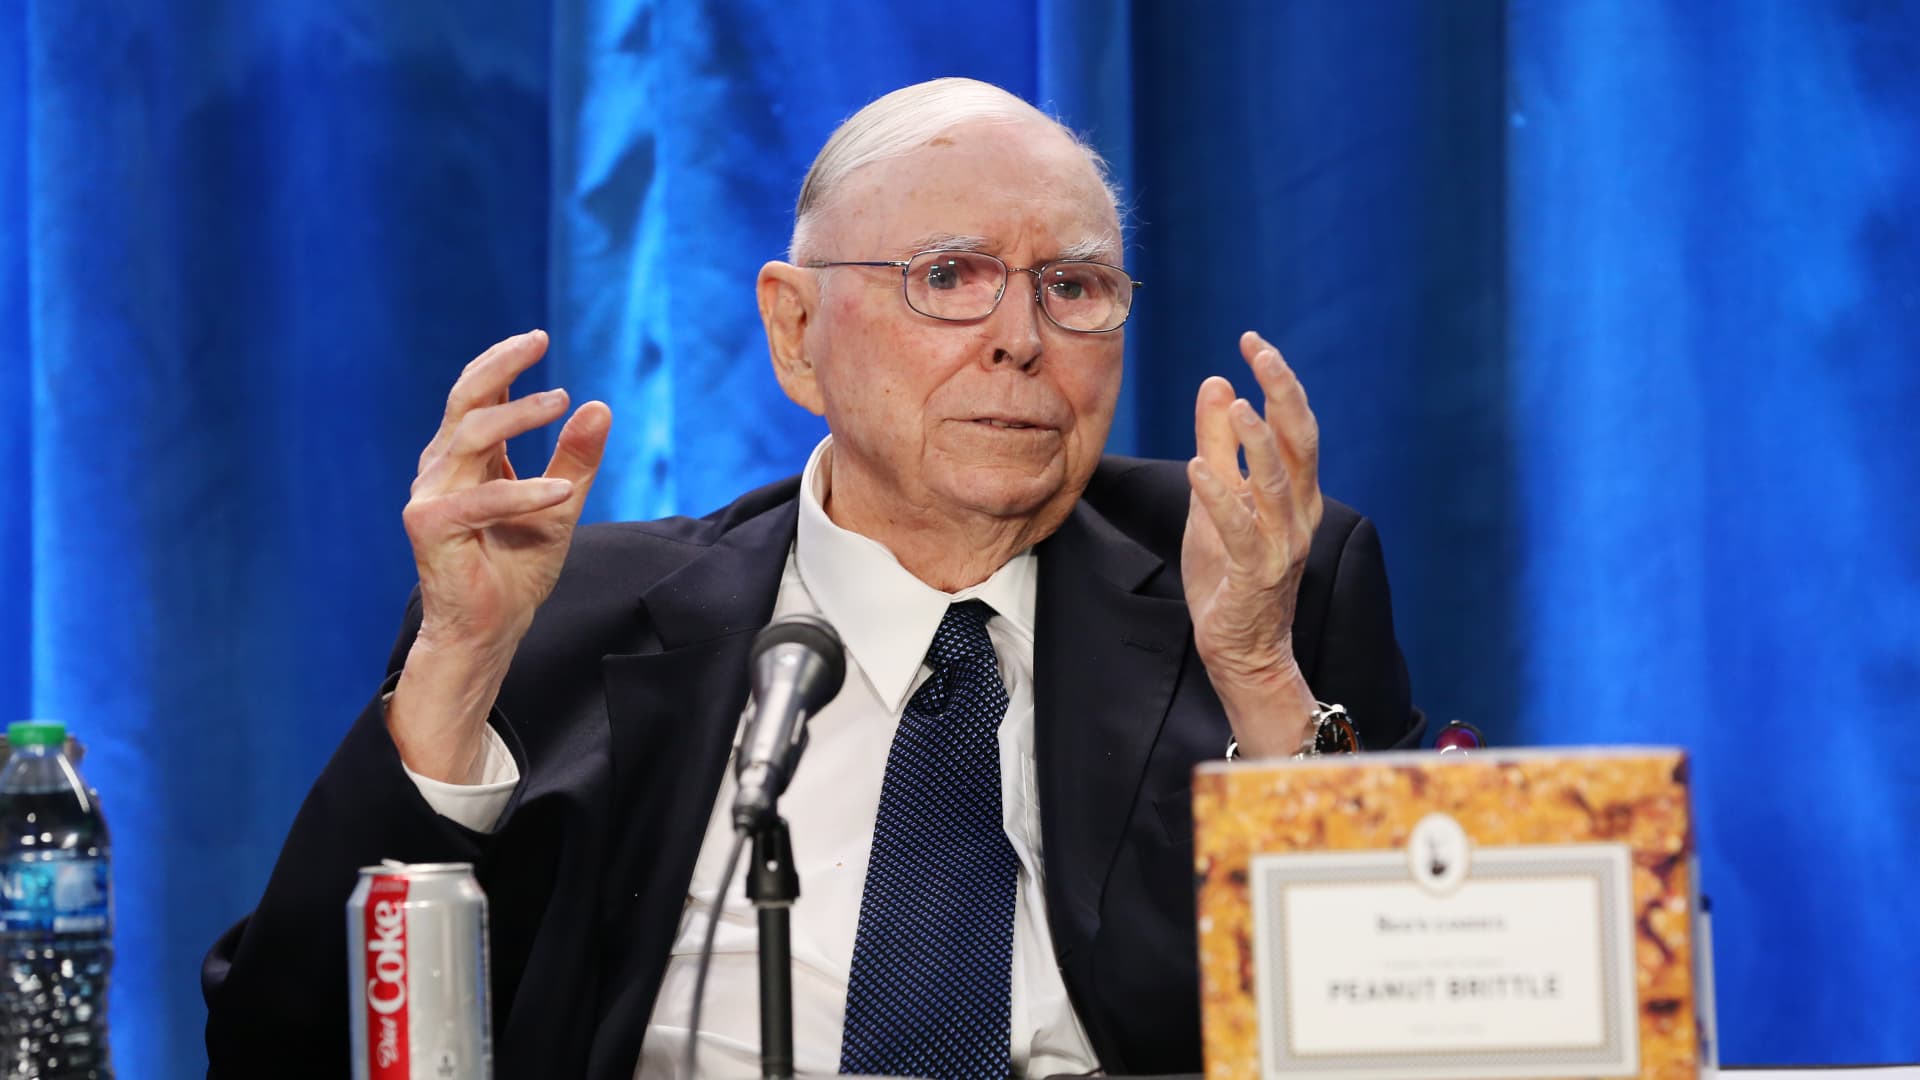 Billionaire investor Charlie Munger: ‘The world is not driven by